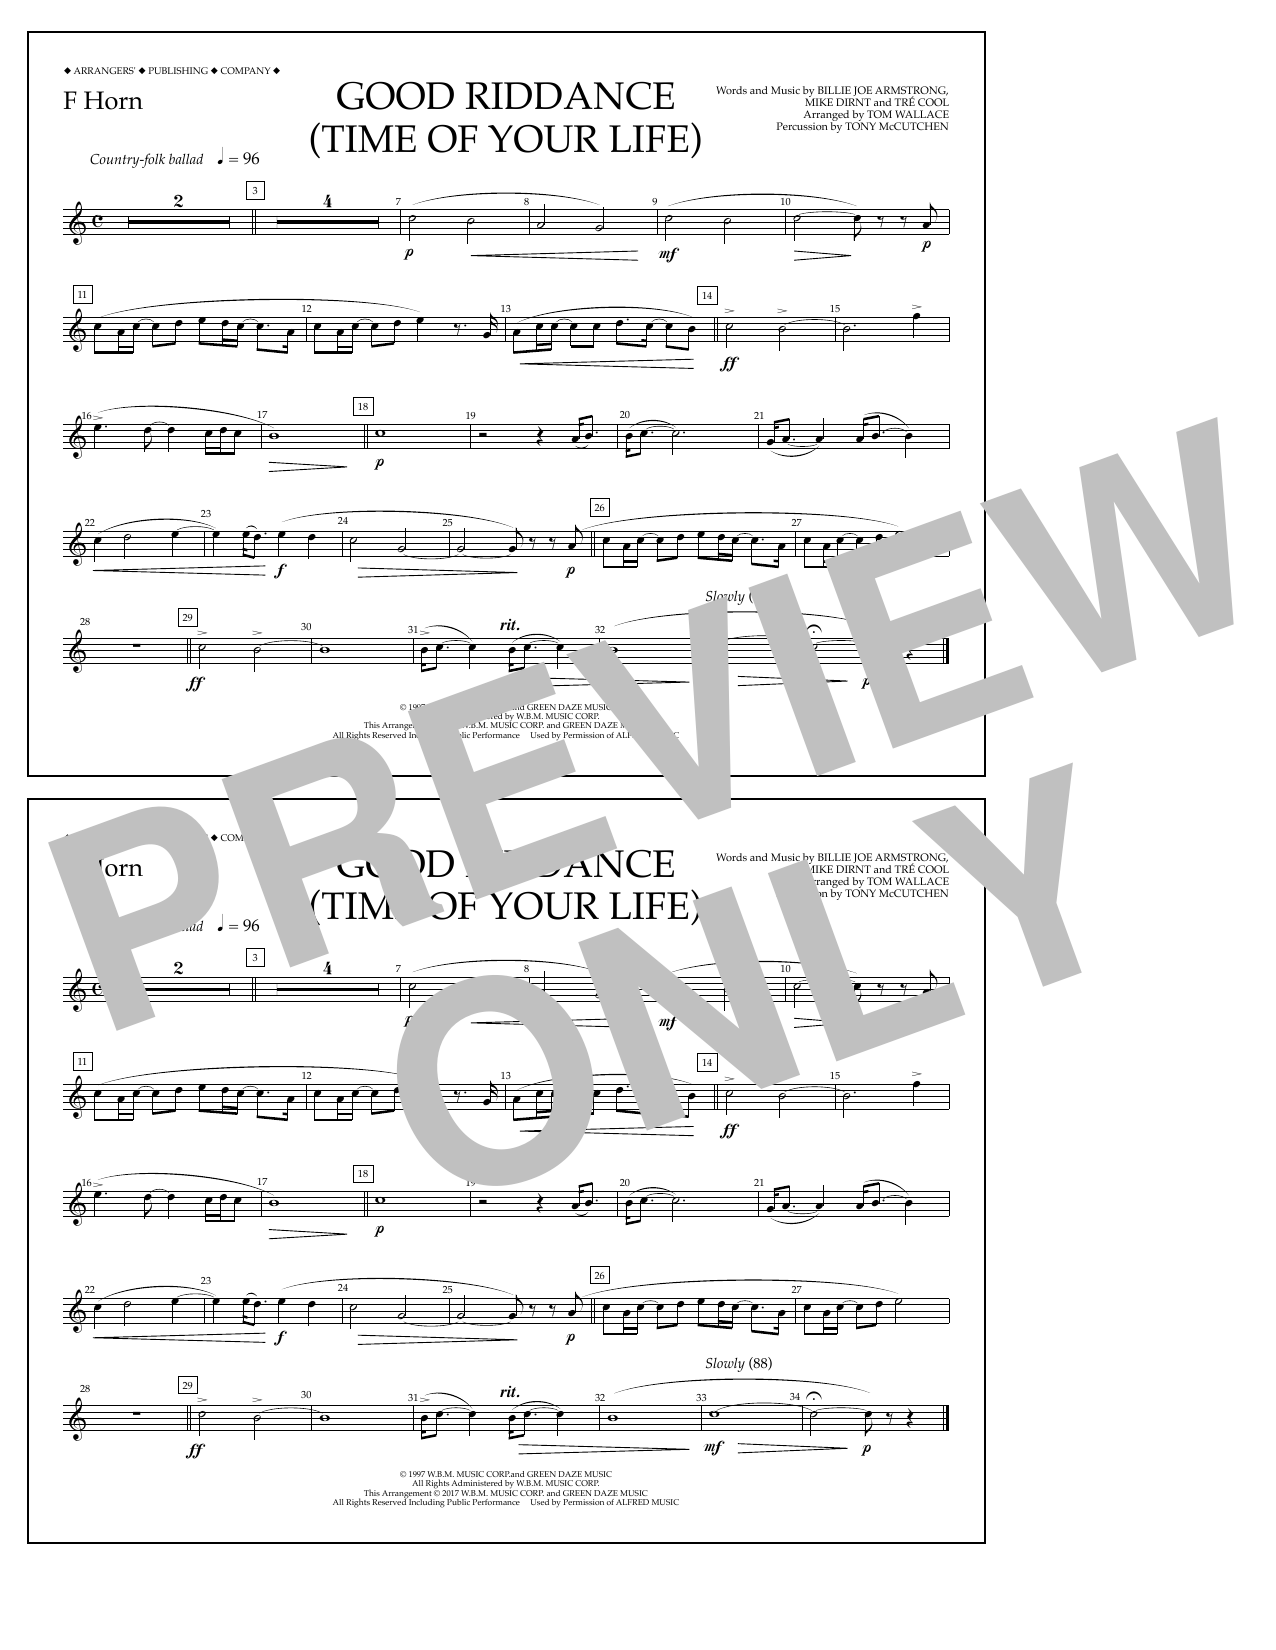 Download Tom Wallace Good Riddance (Time of Your Life) - F H Sheet Music